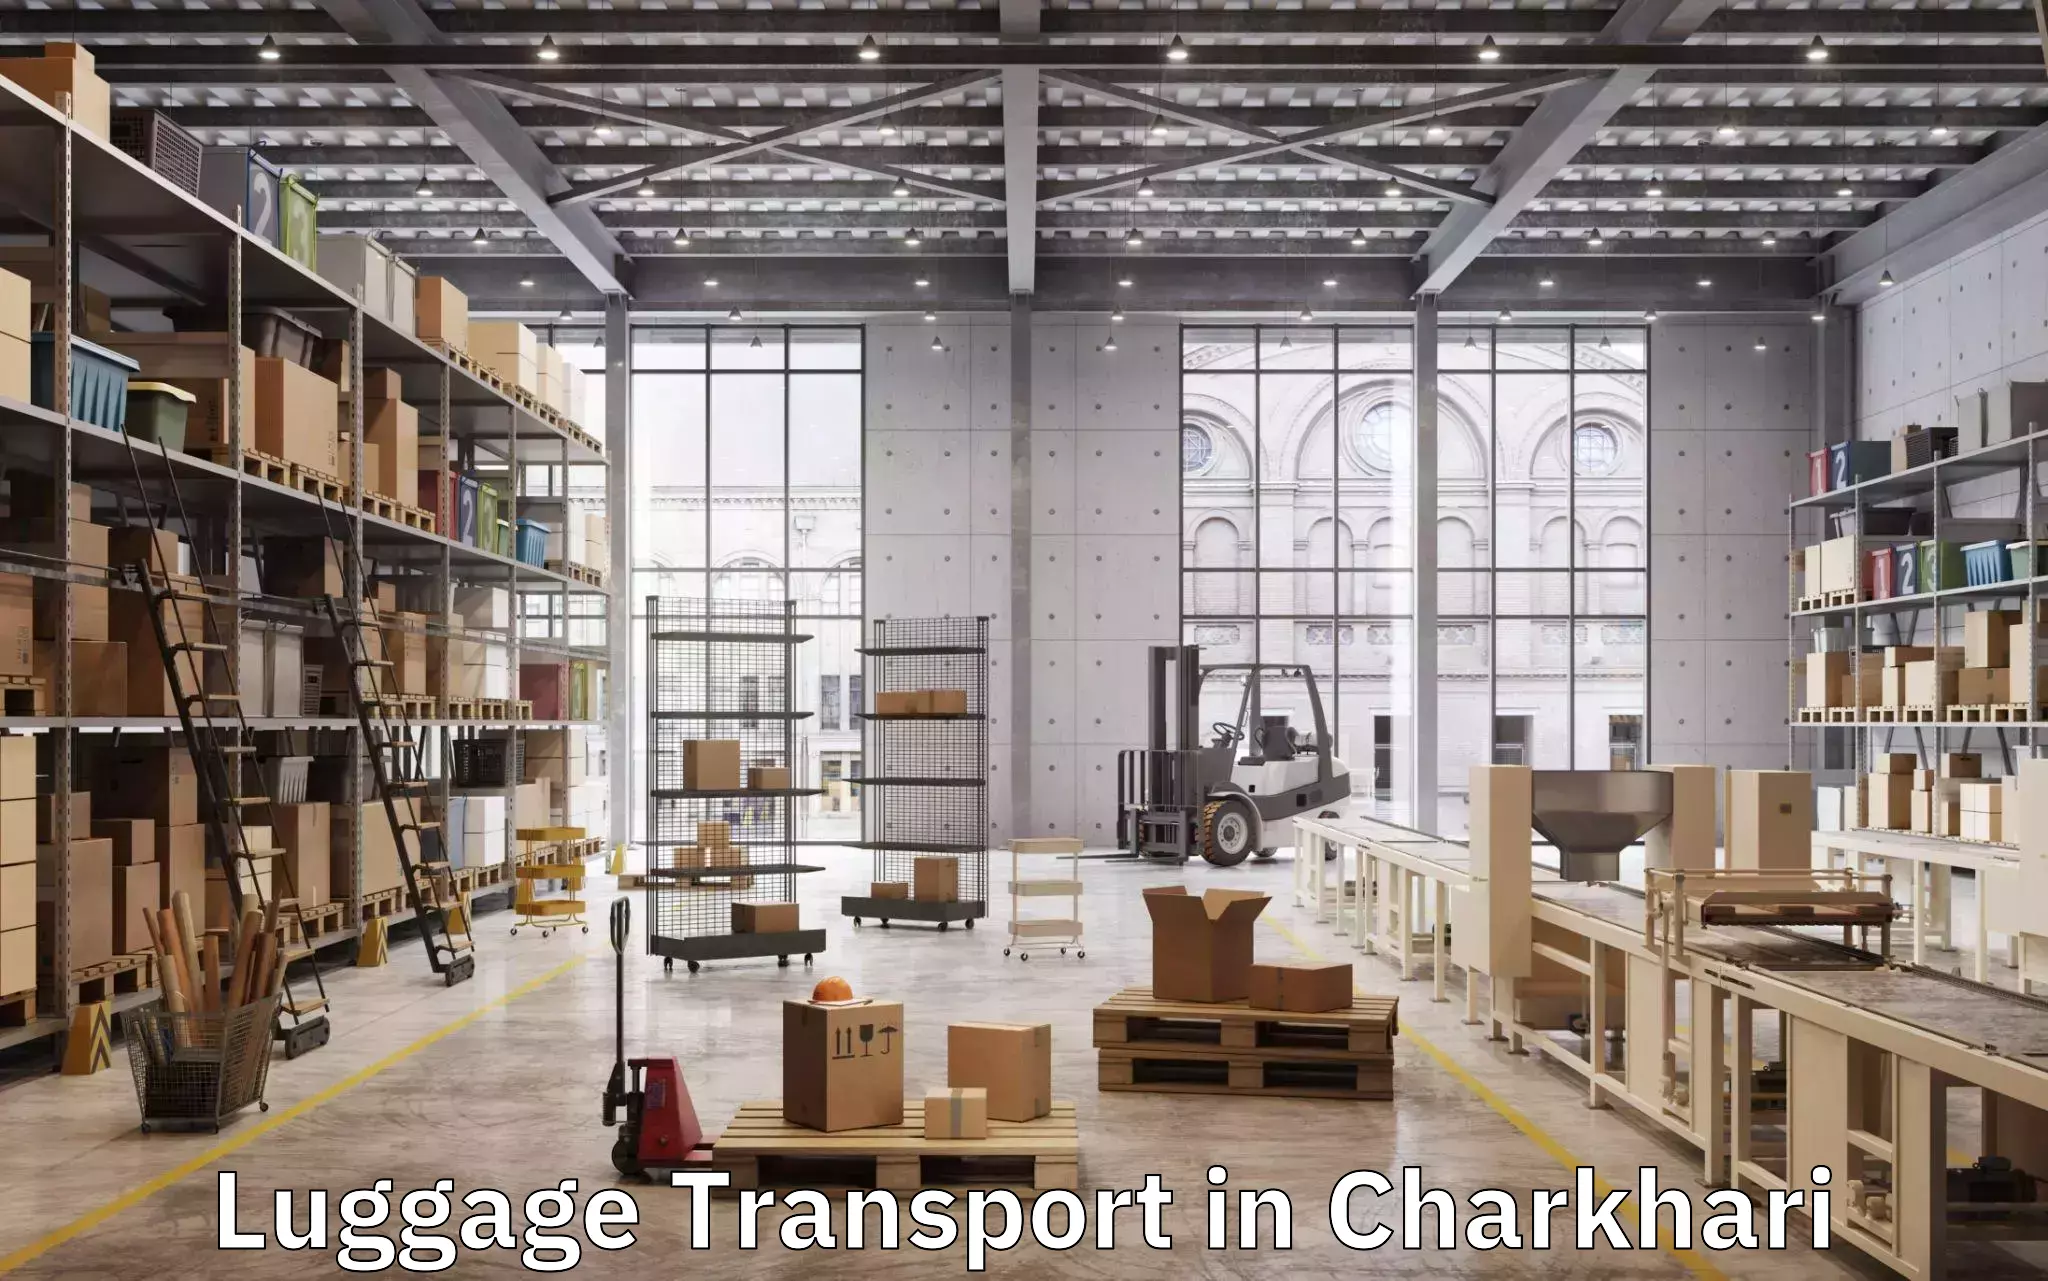 Baggage shipping experience in Charkhari